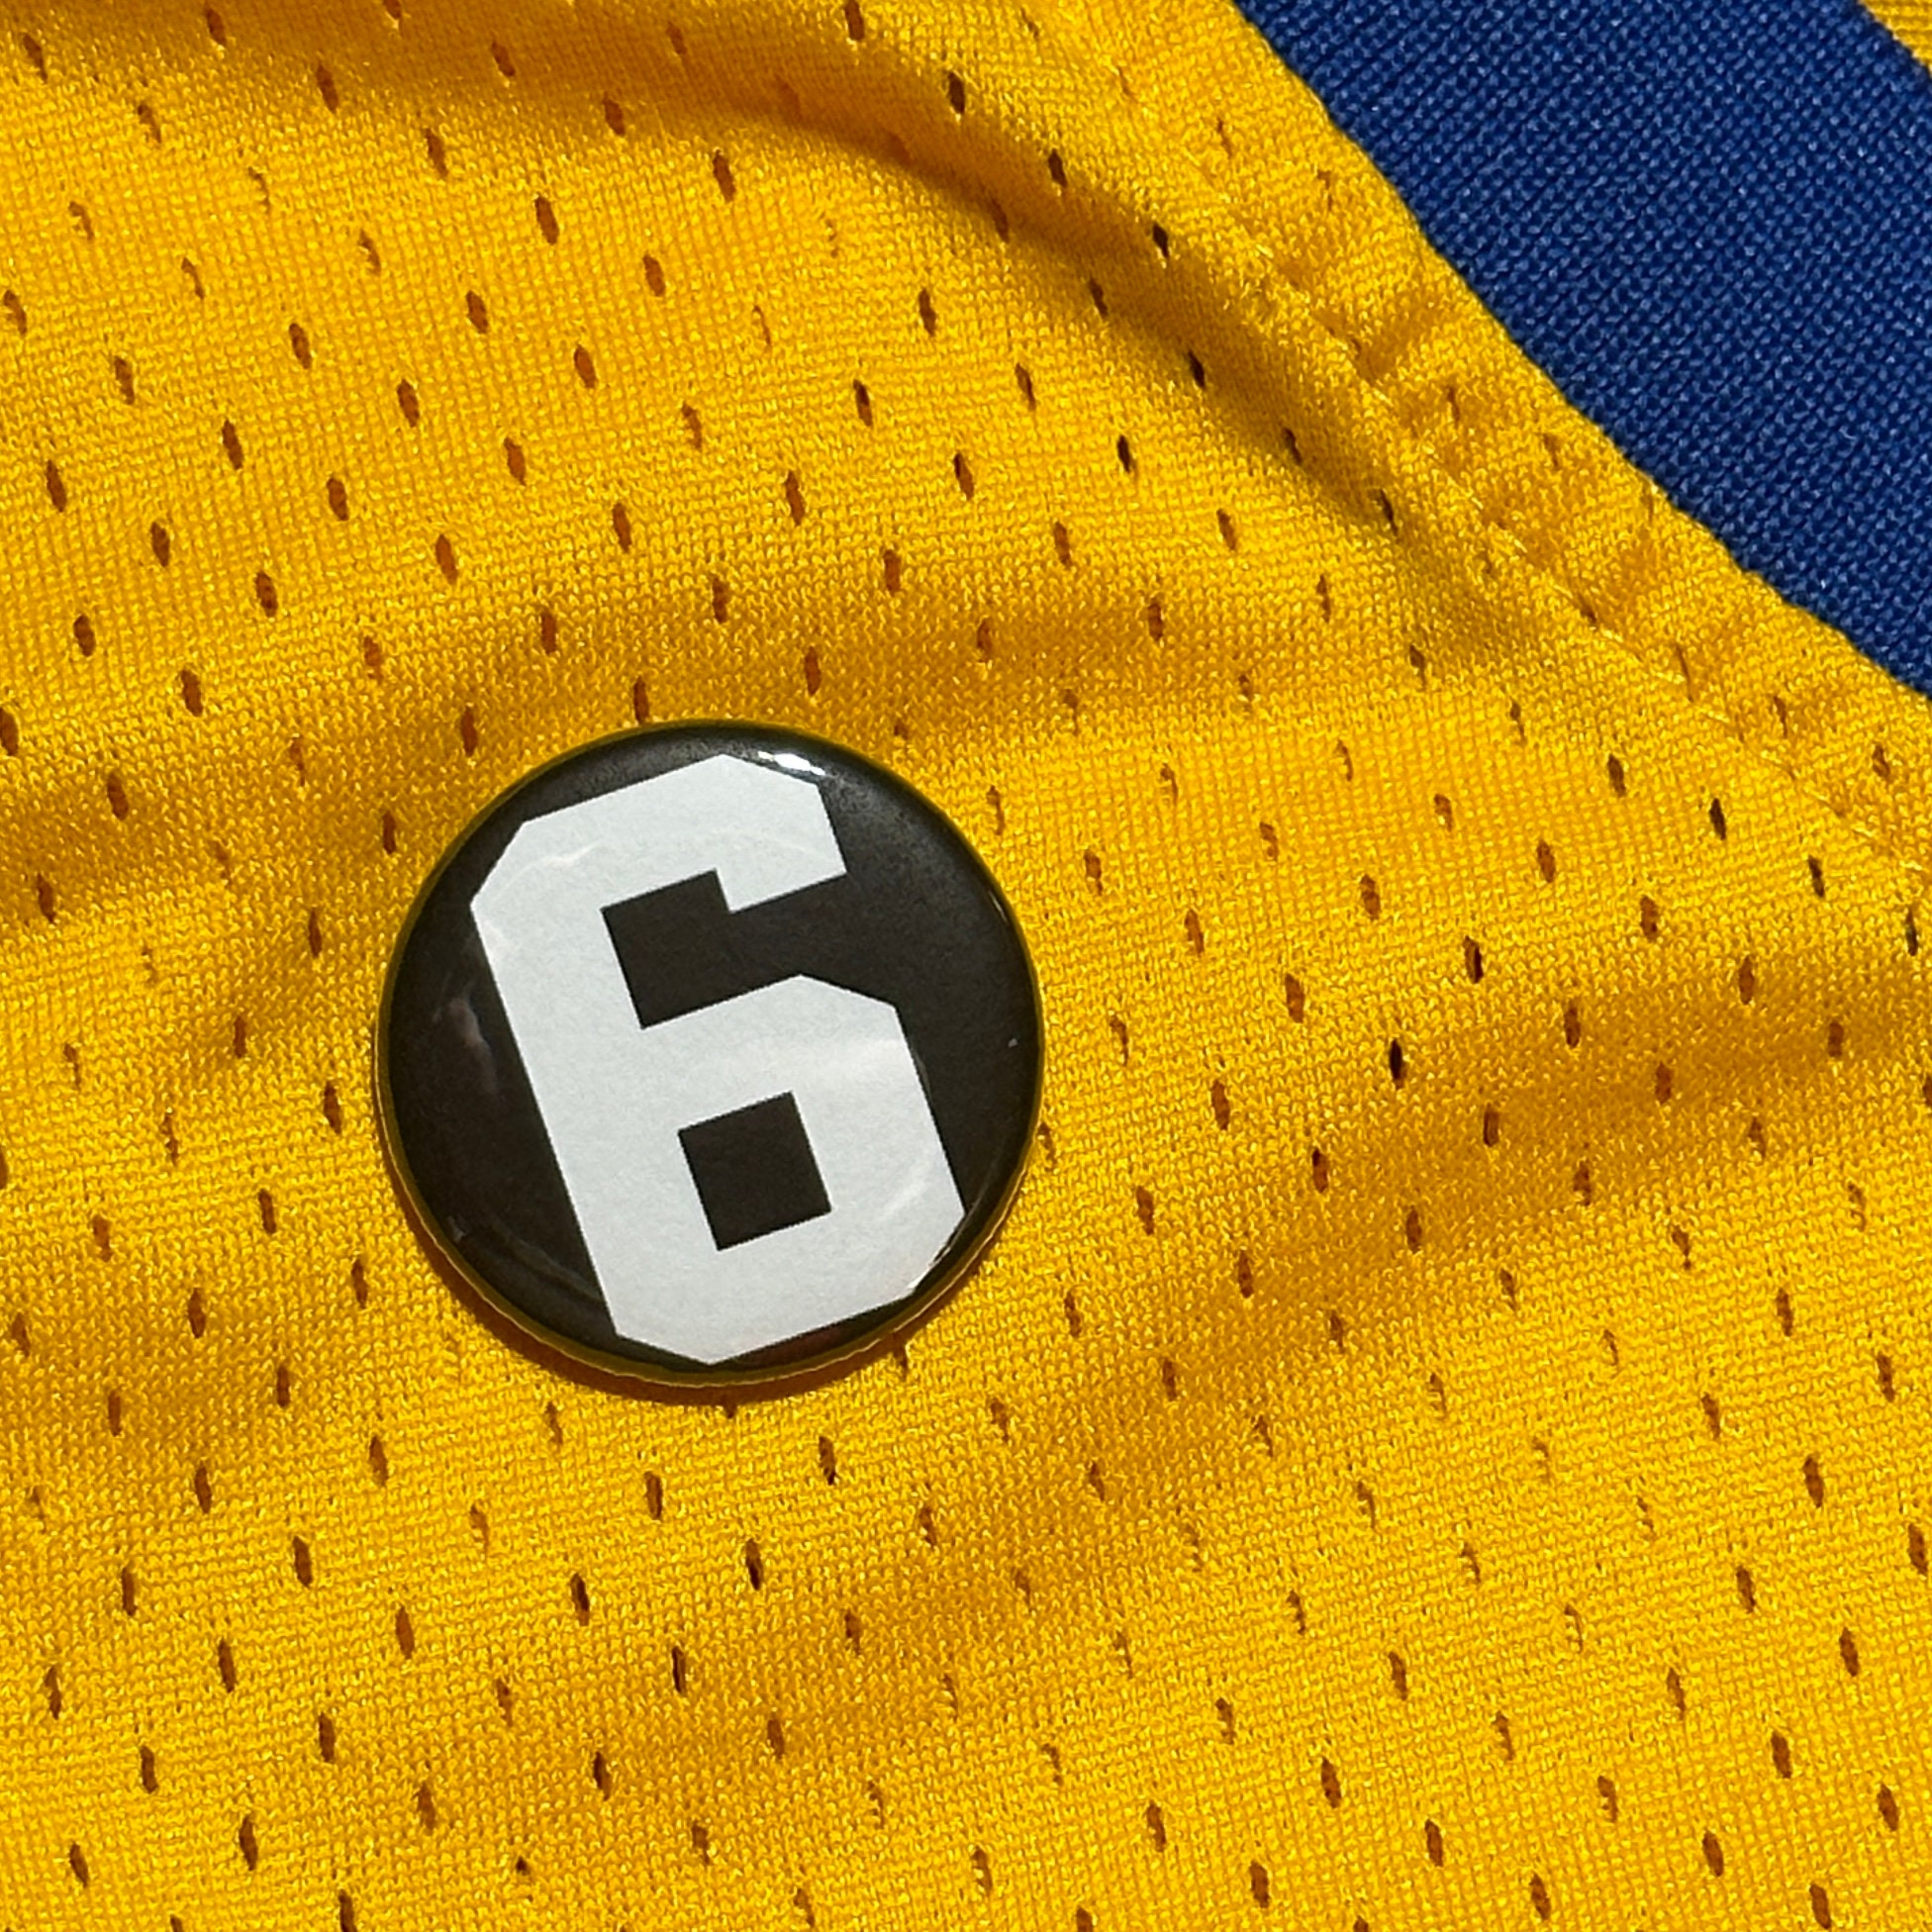 Bill Russell #6 Jersey Patch Basketball Jersey Patch Indiana Pacers Iron On